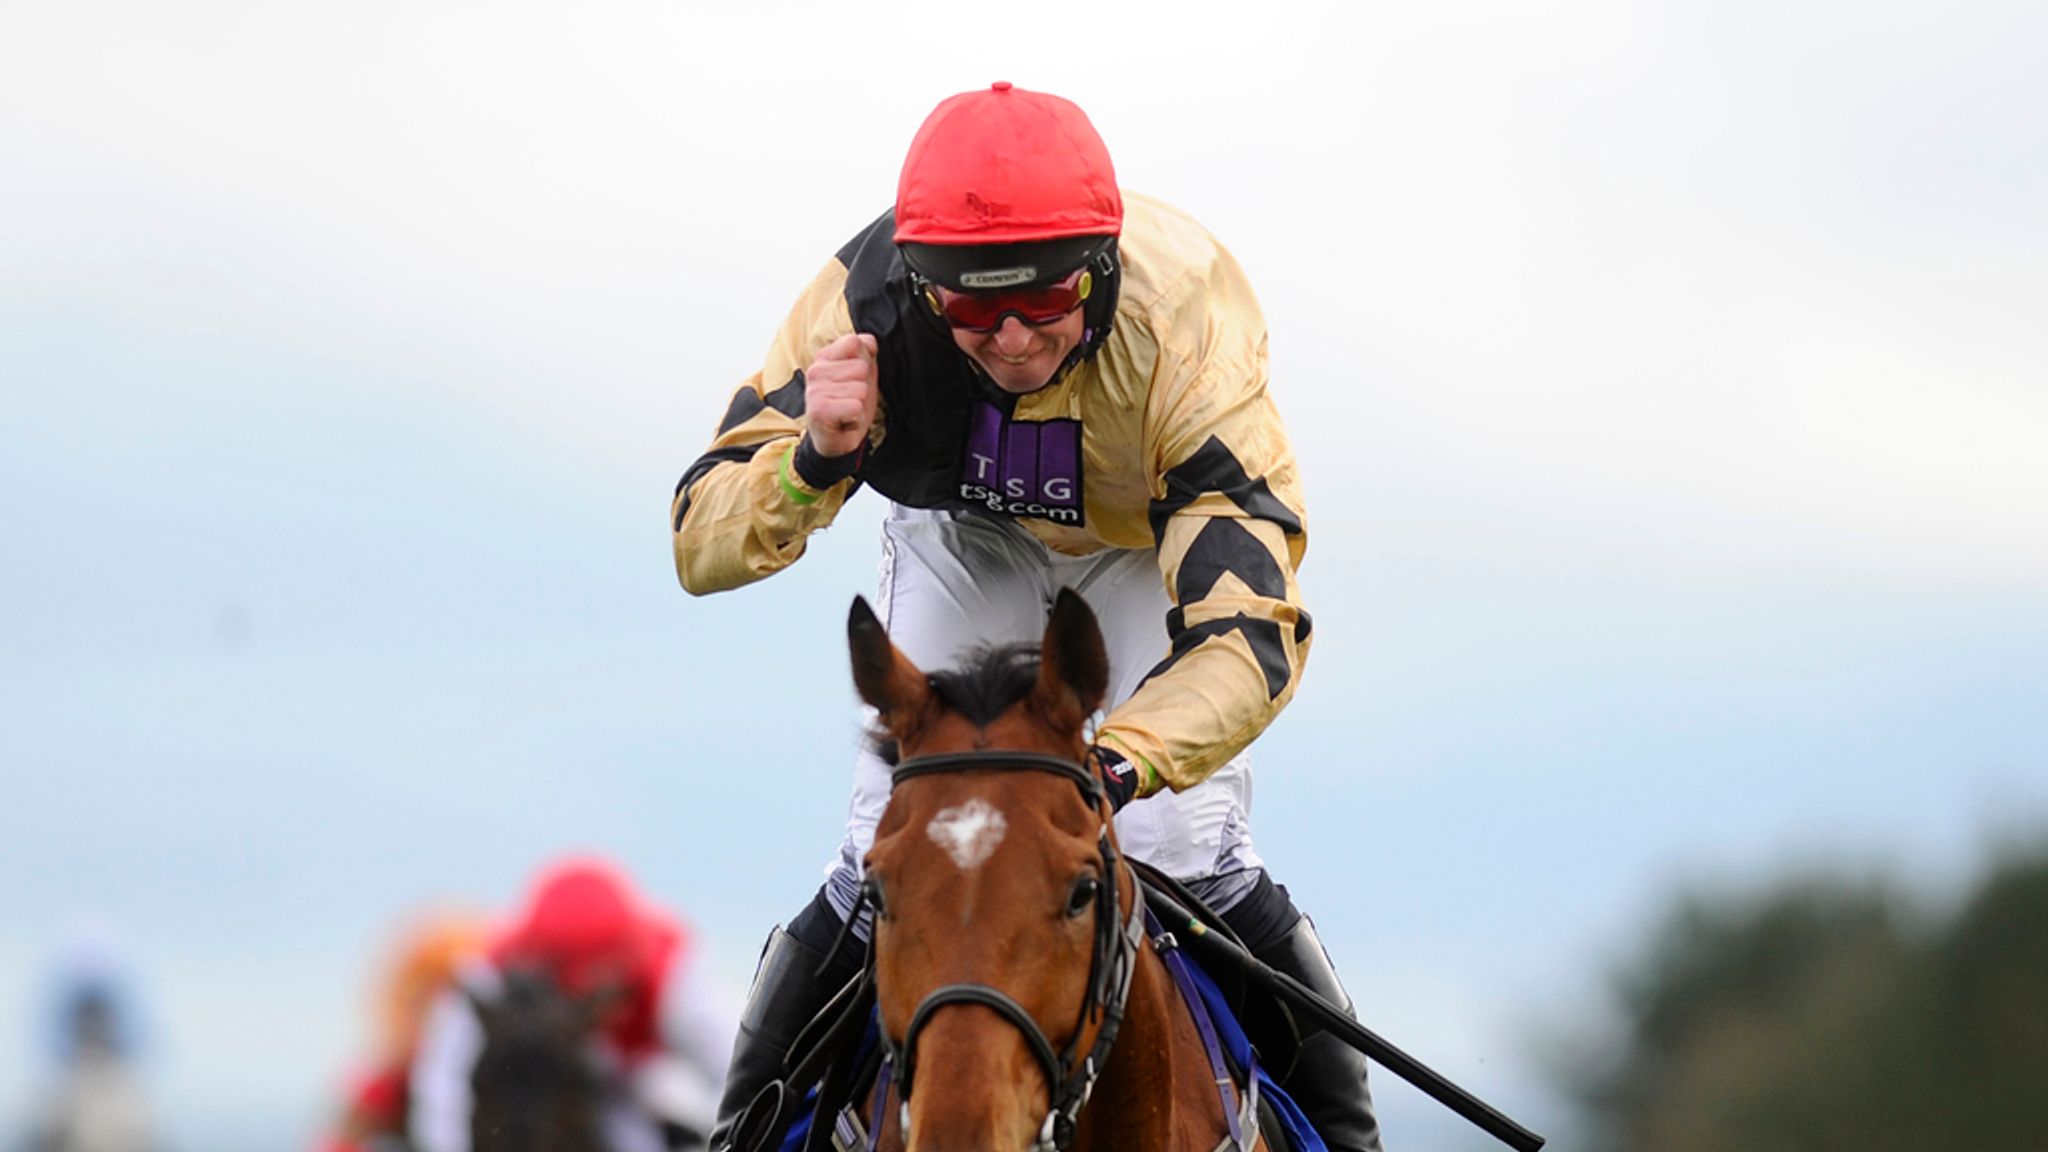 Willie Mullins Appears To Hold Most Of The Aces In The Navan Novice Hurdle On Sunday Racing